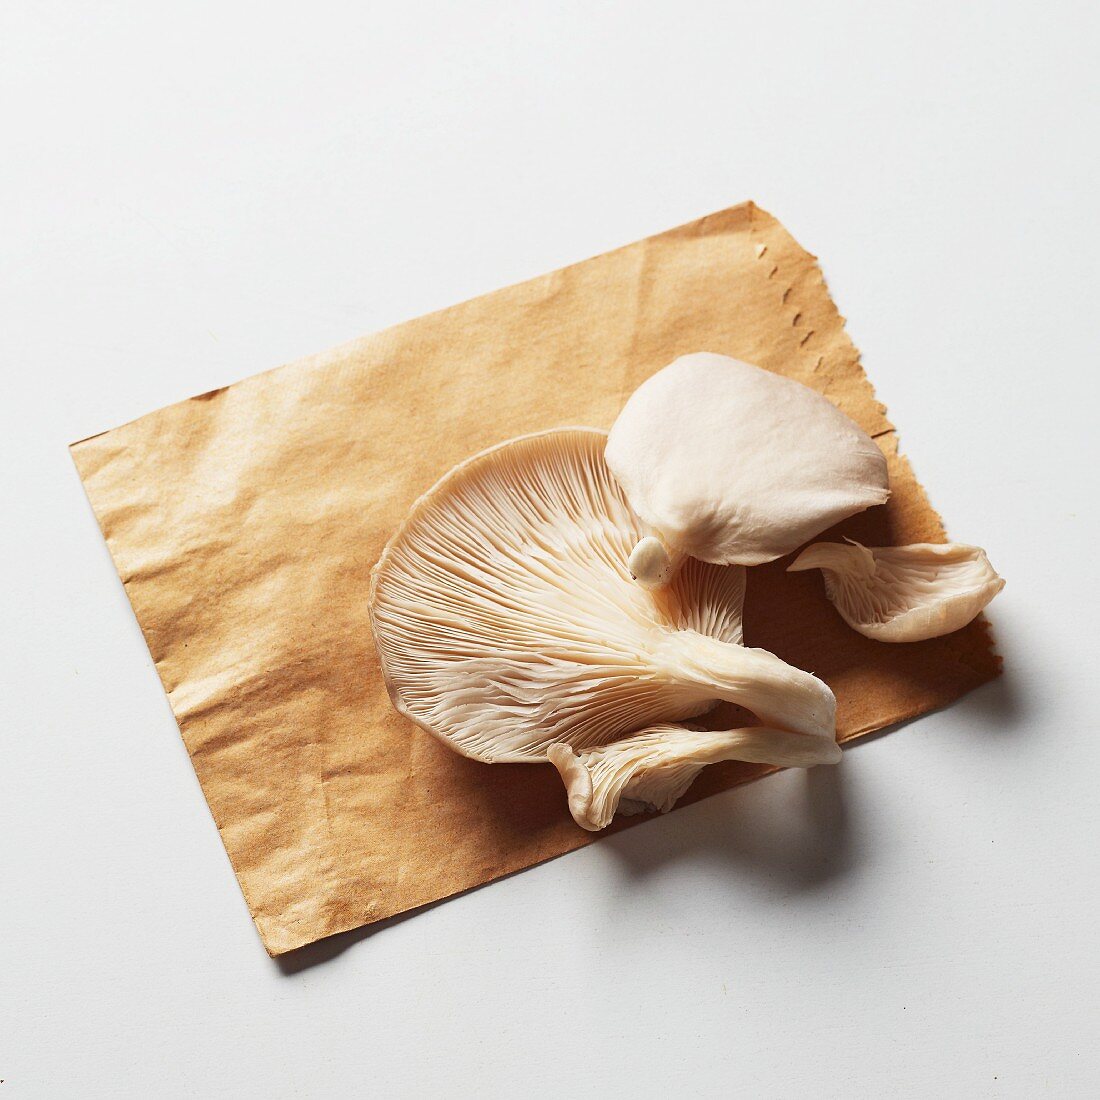 Oyster mushrooms on a brown paper bag